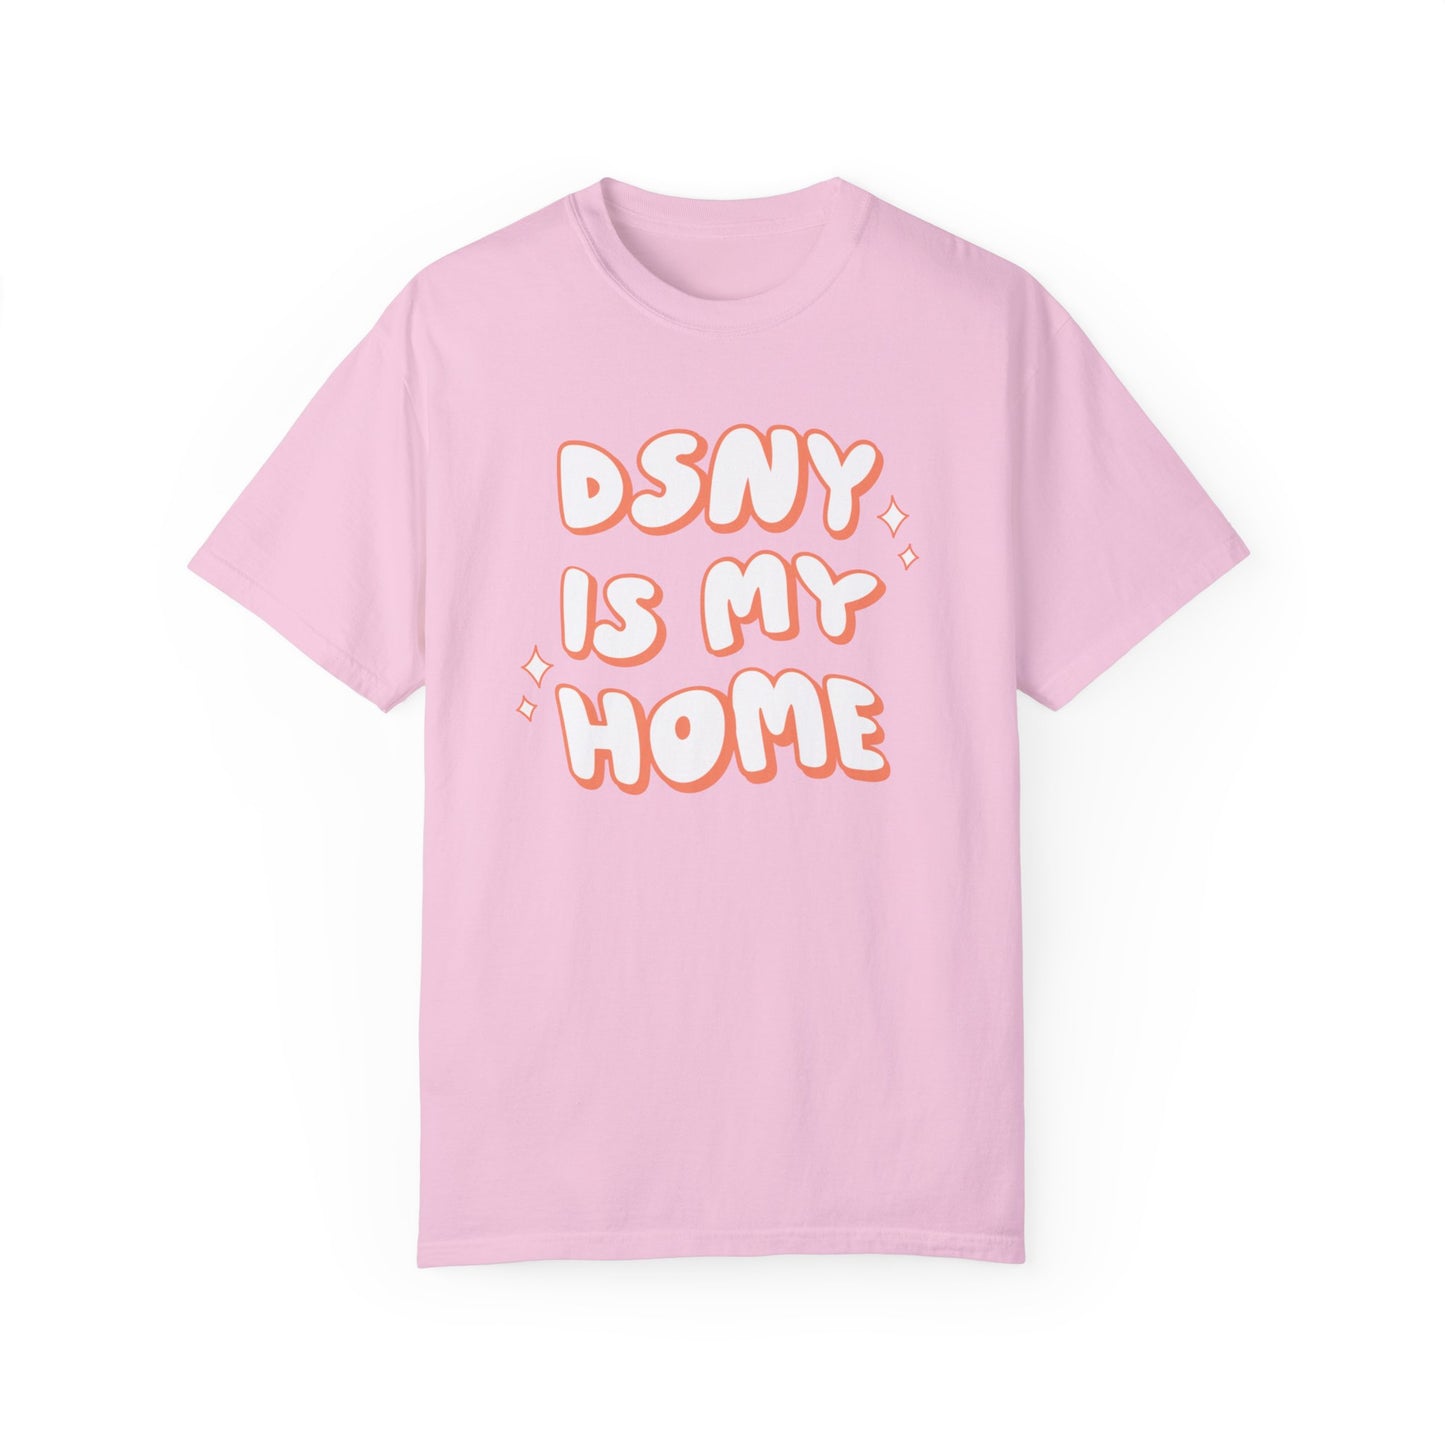 Adult Dsny is home - Comfort Colors